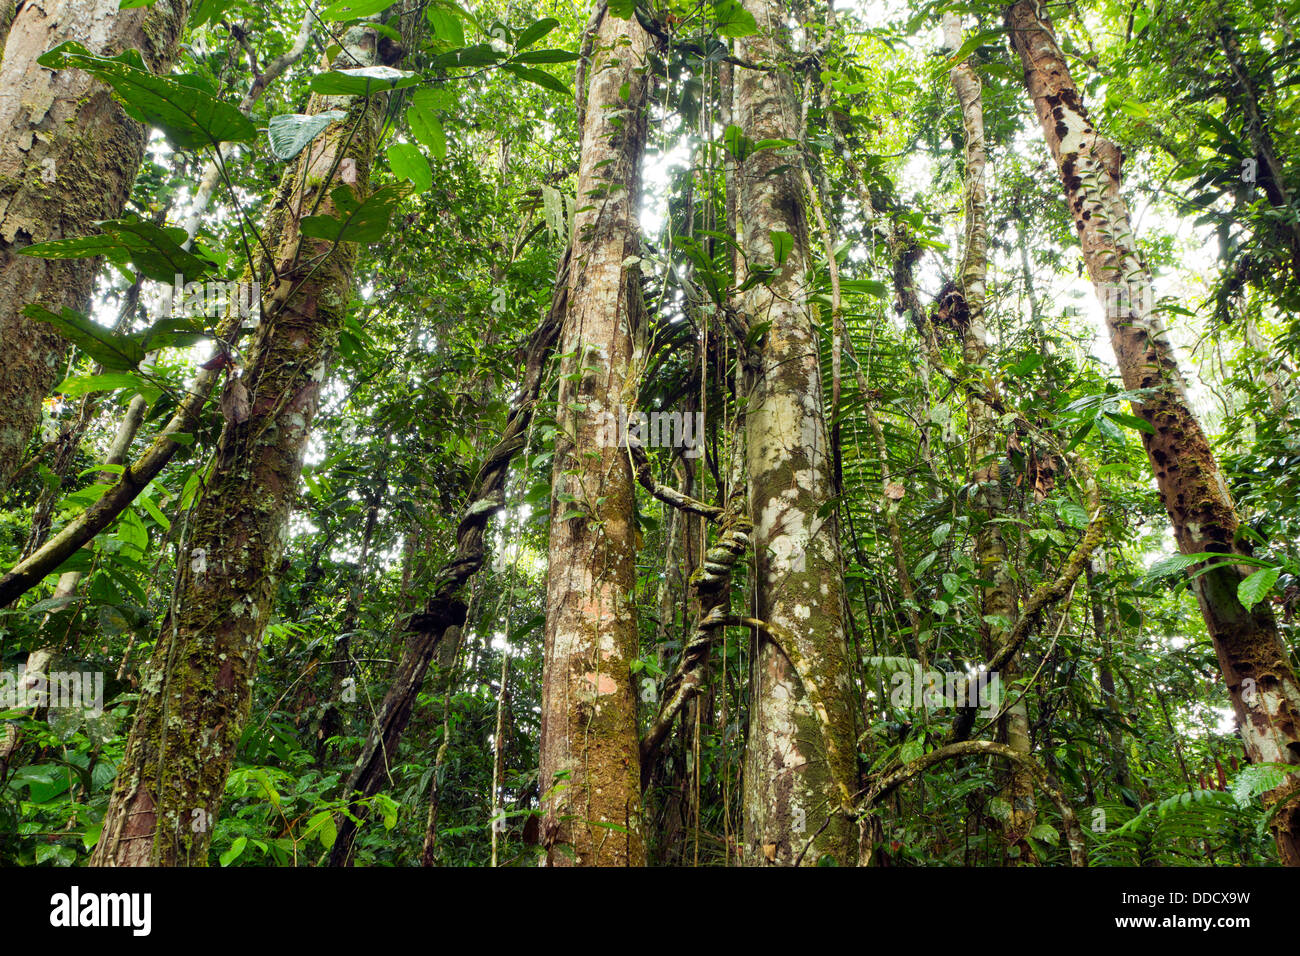 Tree trunks in tropical rainforest, Ecuador hung with lianas Stock Photo